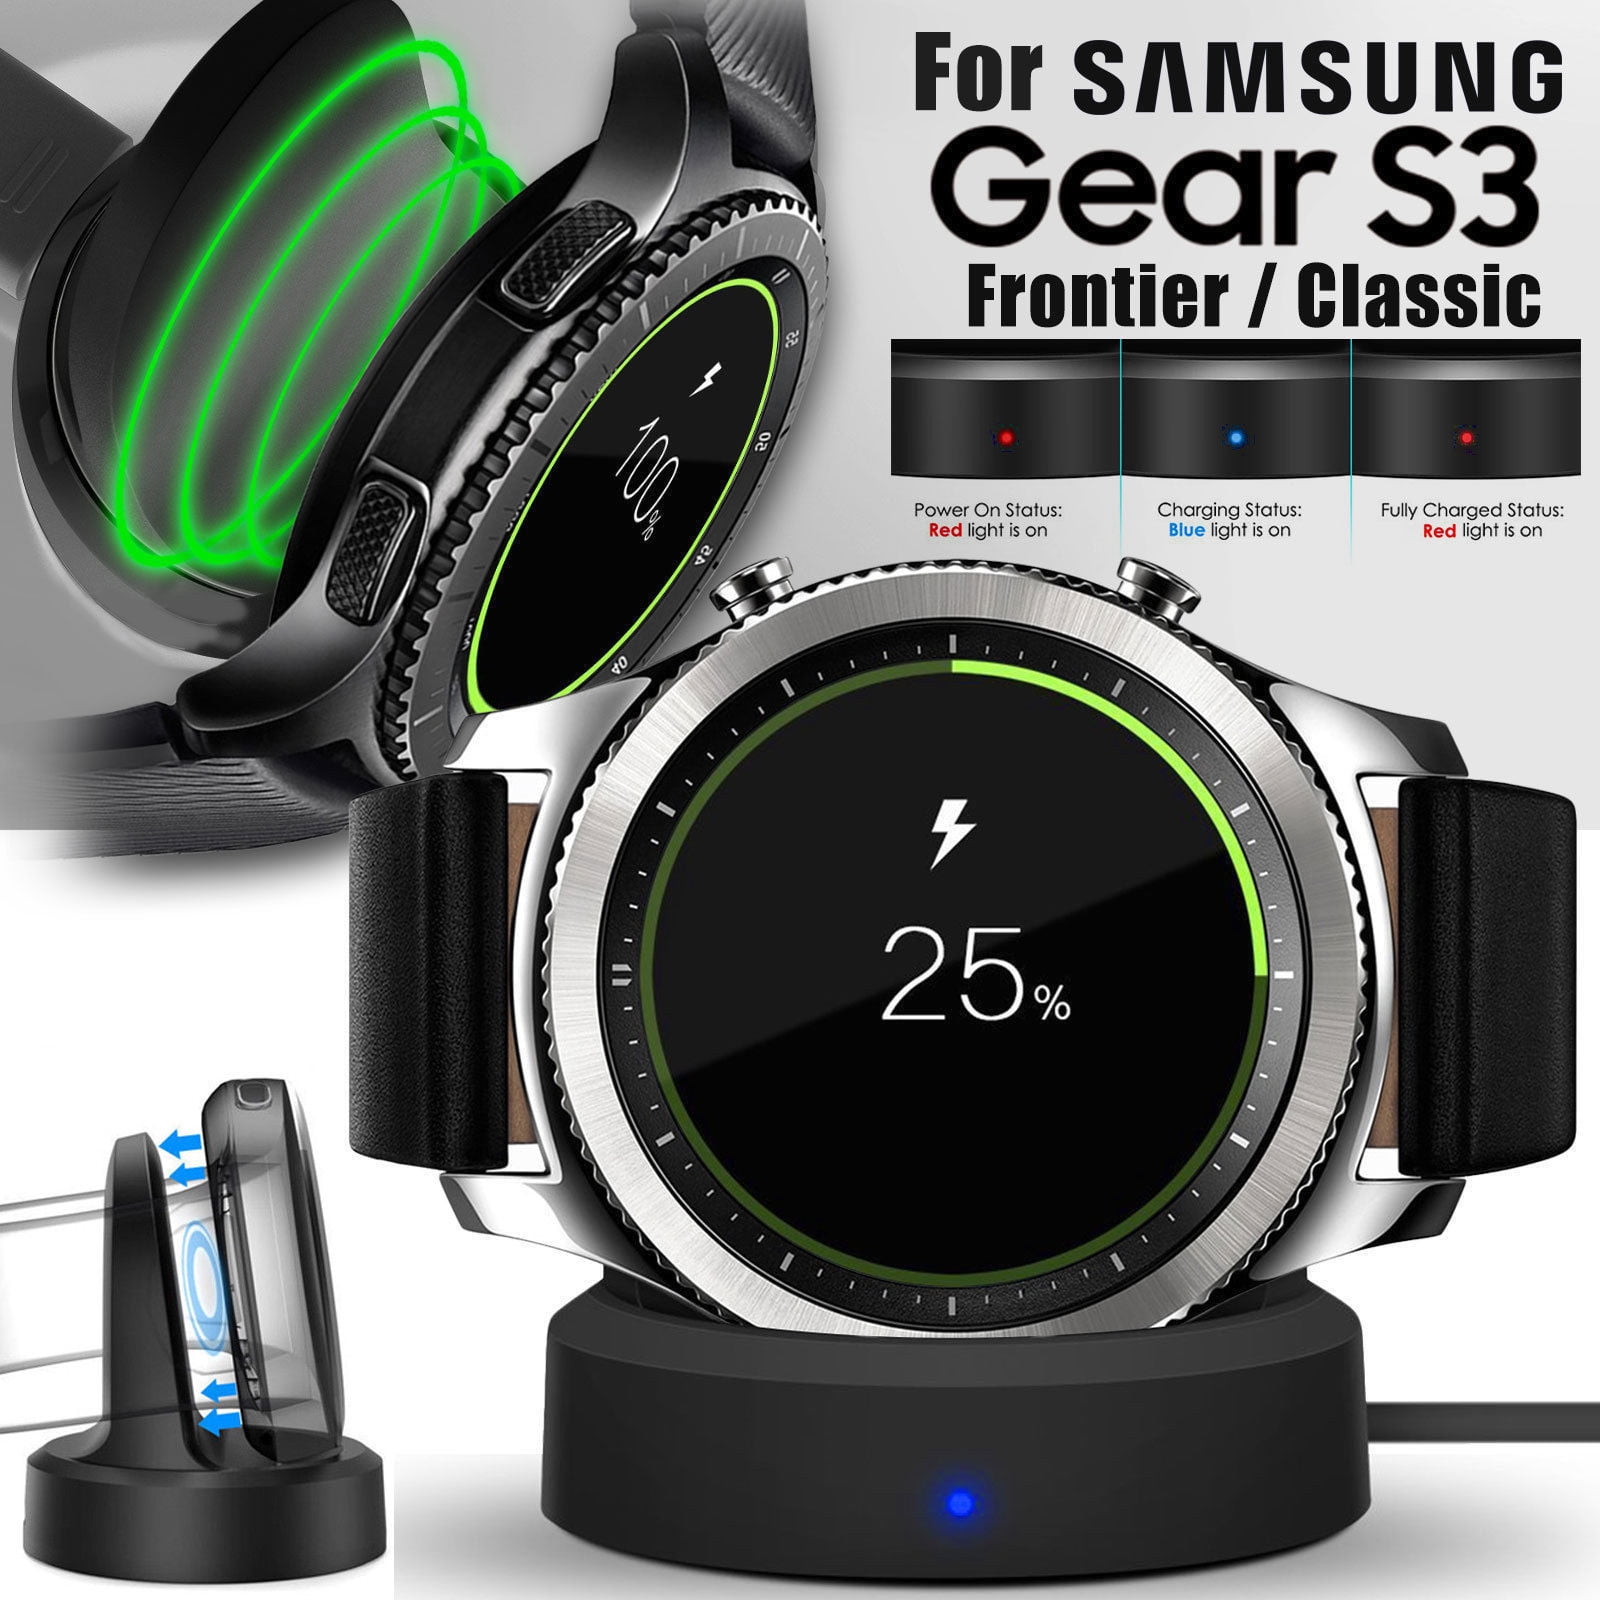 galaxy s3 frontier charger